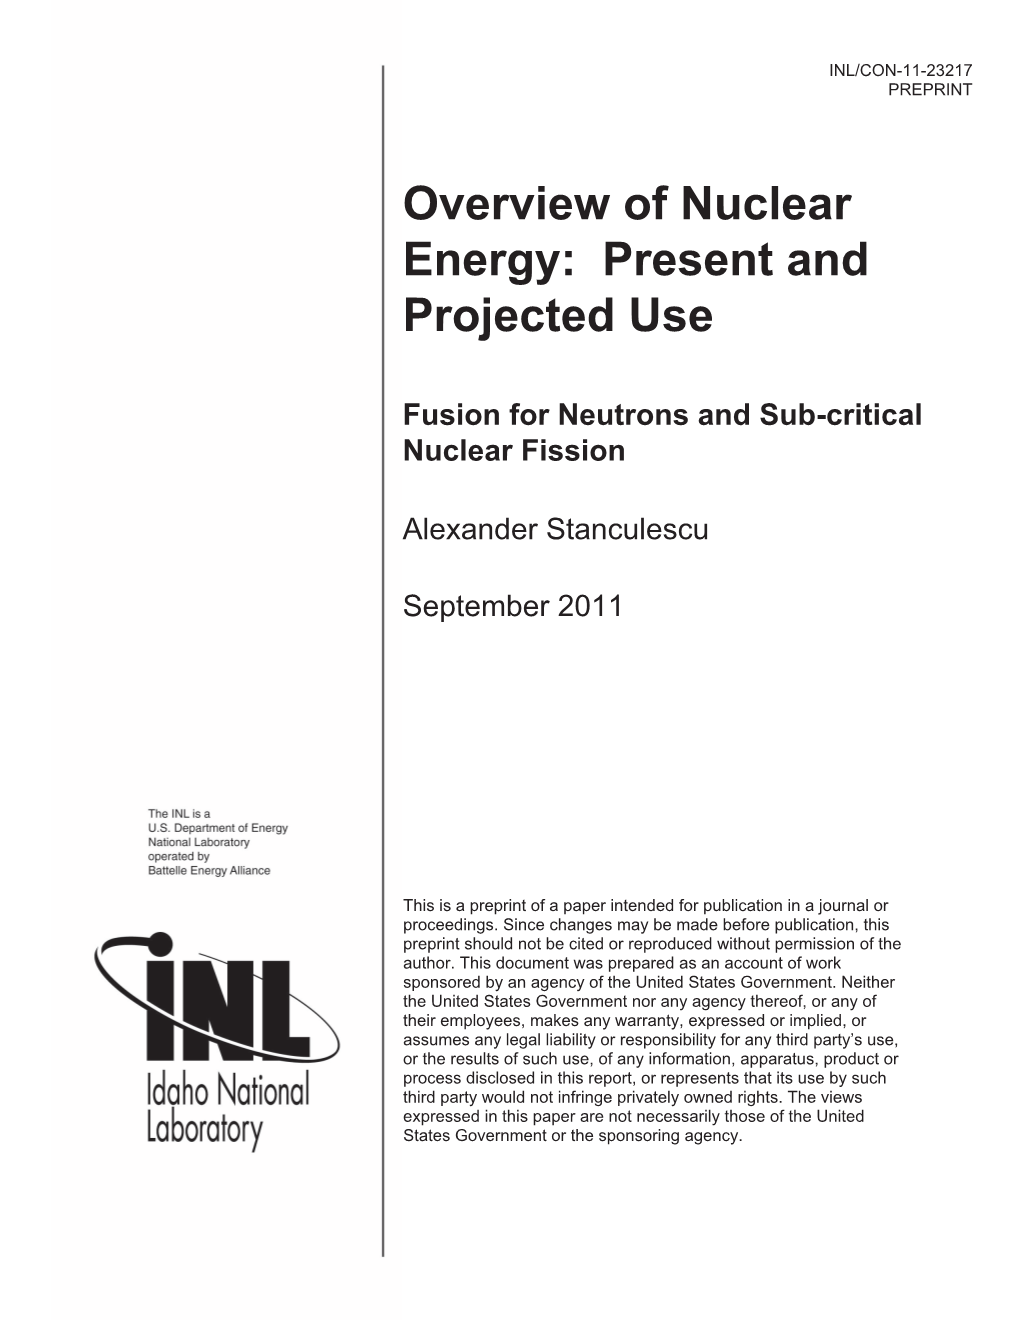 Overview of Nuclear Energy: Present and Projected Use